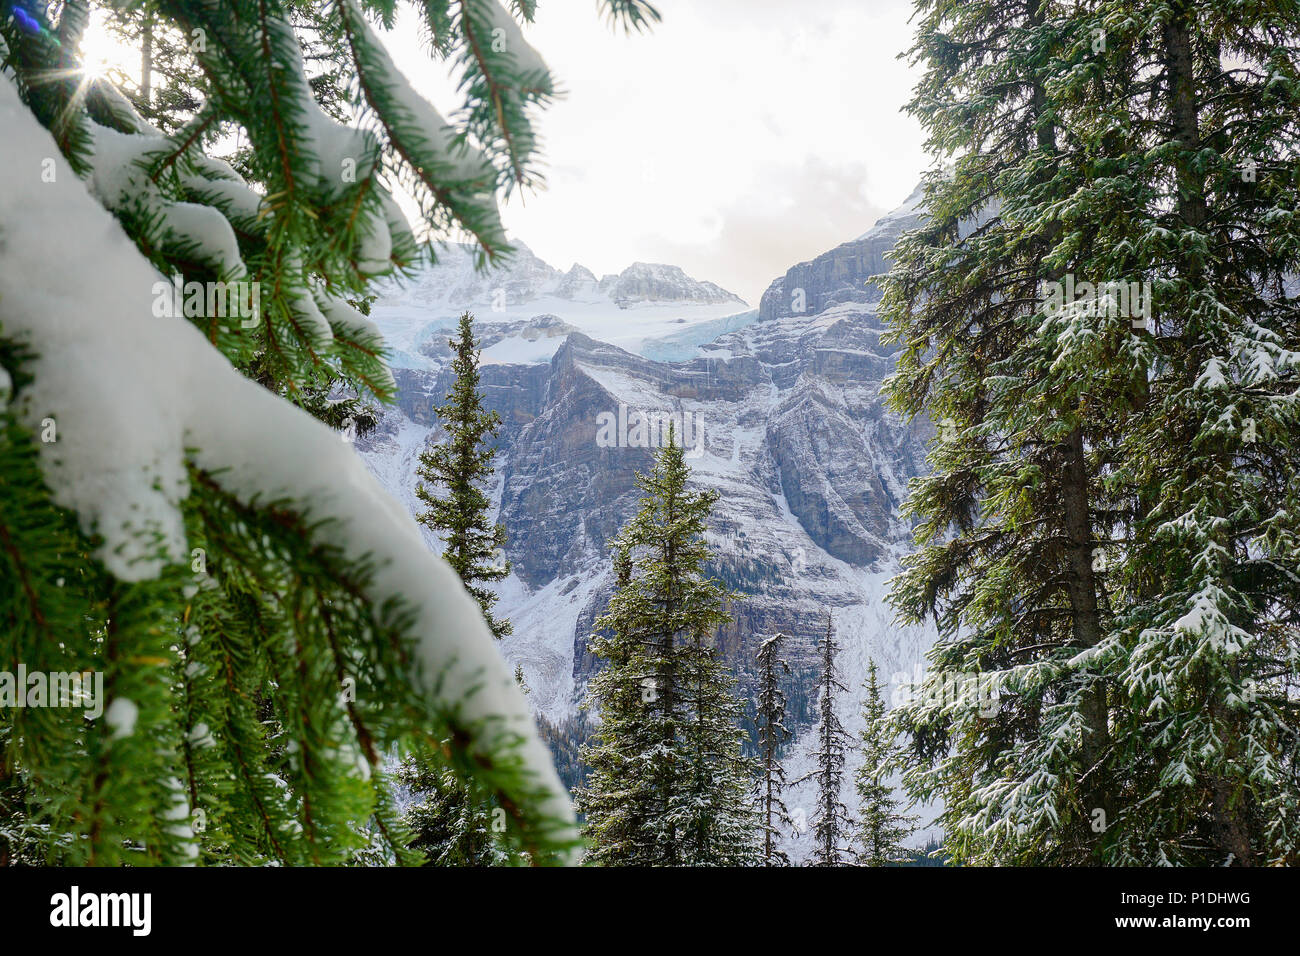 Tall peak from the Rockies in Banff, at Lake Louise. Stock Photo